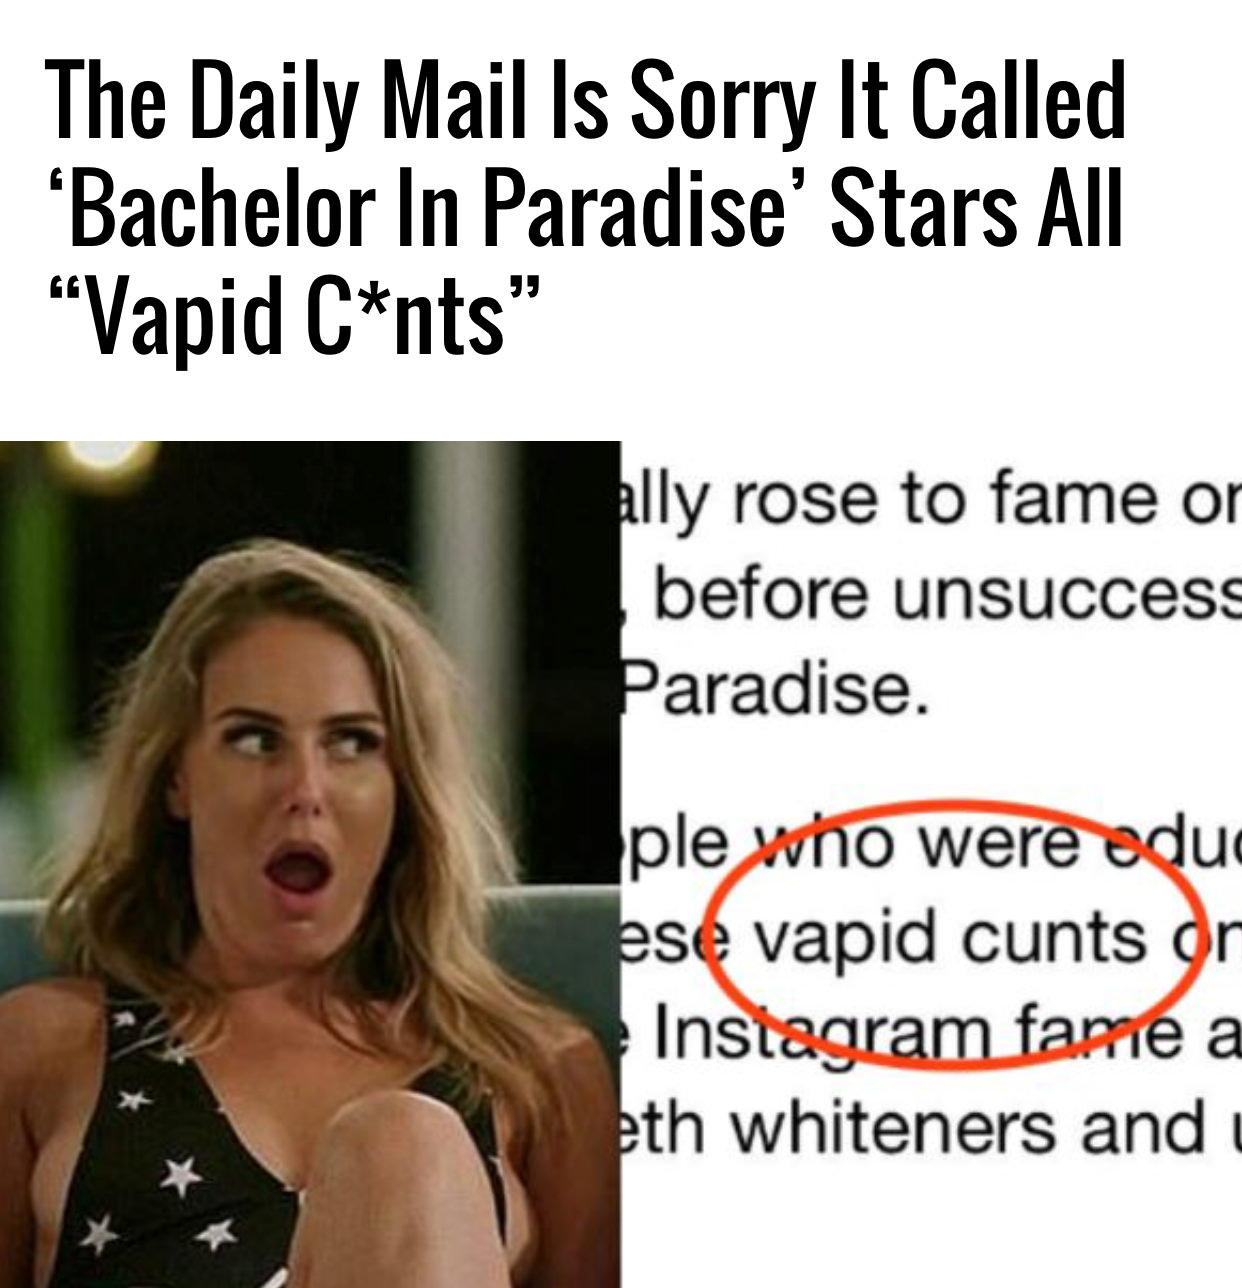 photo caption - The Daily Mail Is Sorry It Called 'Bachelor In Paradise' Stars All "Vapid Cnts" ally rose to fame or before unsuccess Paradise. ple who were aduc ese vapid cunts or Instagram fame a ath whiteners and